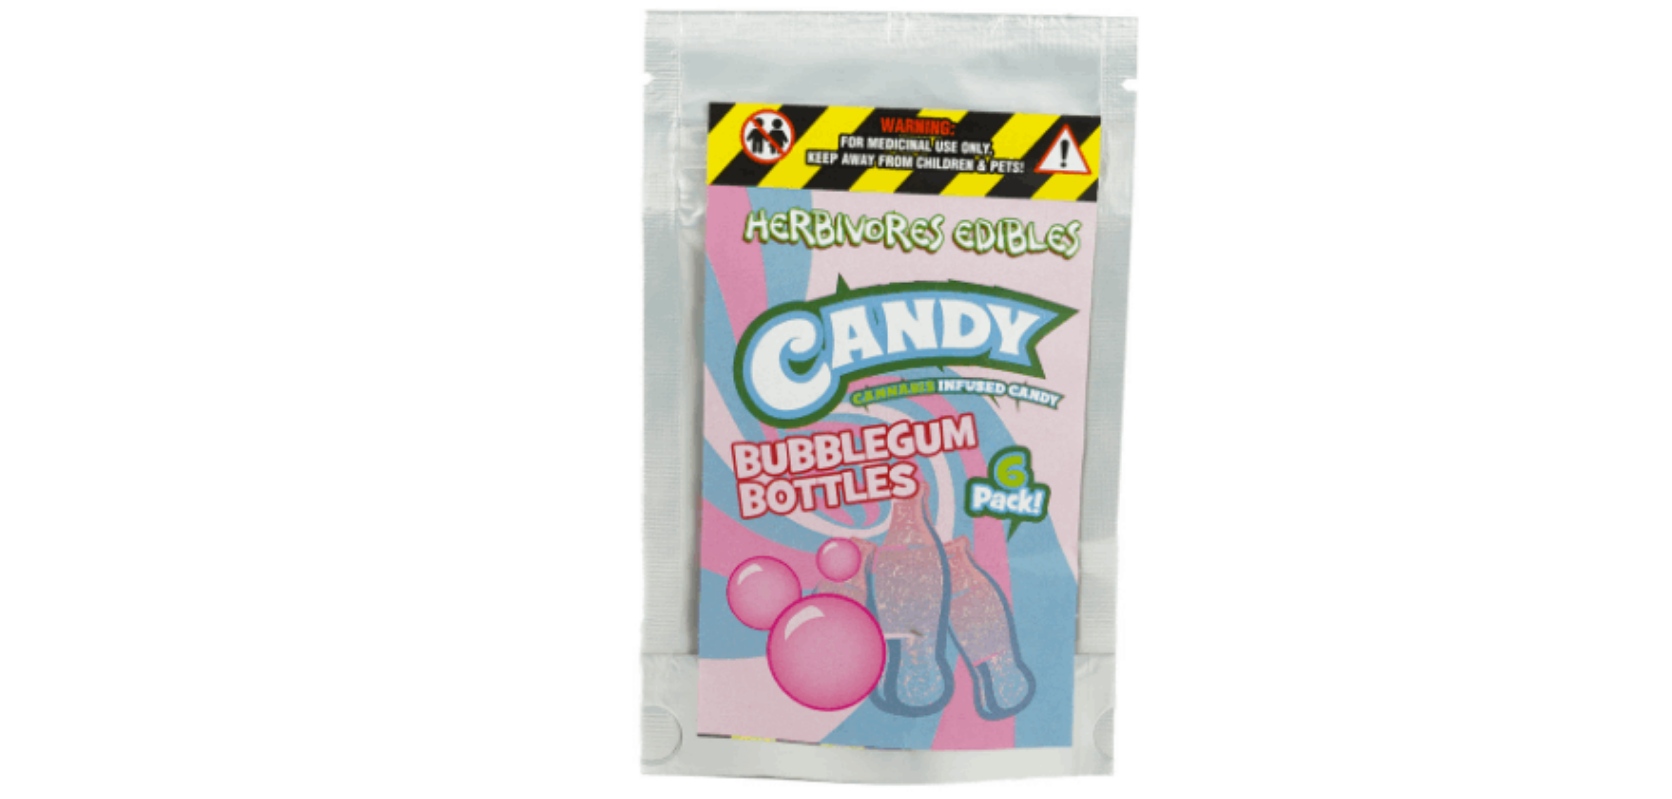 Taste the difference quality can make. Buy Herbivore Edibles’ Bubblegum Bottles from your friendly weed dispensary now!